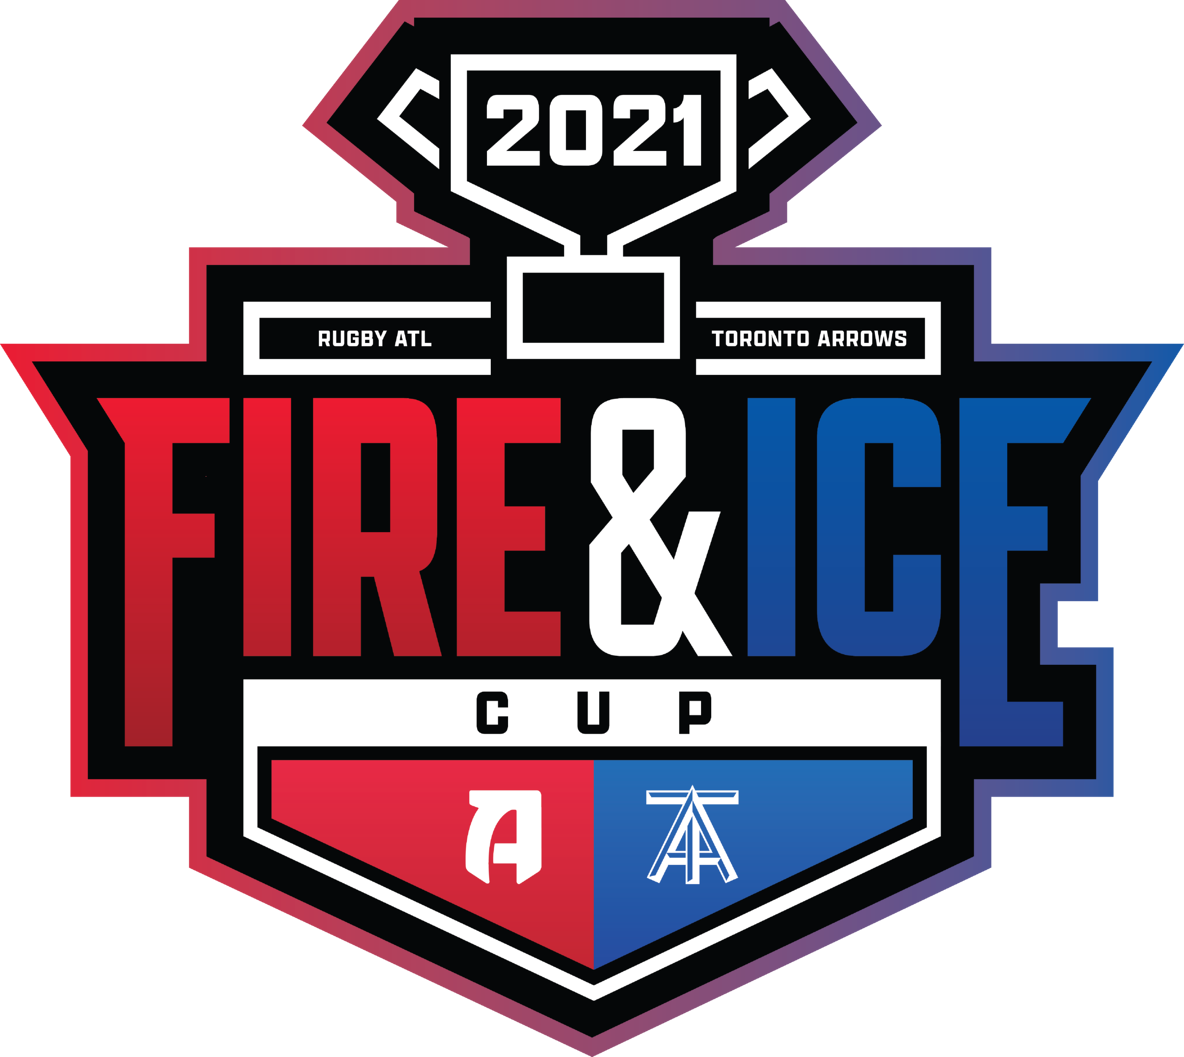 Toronto-Rugby ATL Expand Their Rivalry With The Fire & Ice Cup